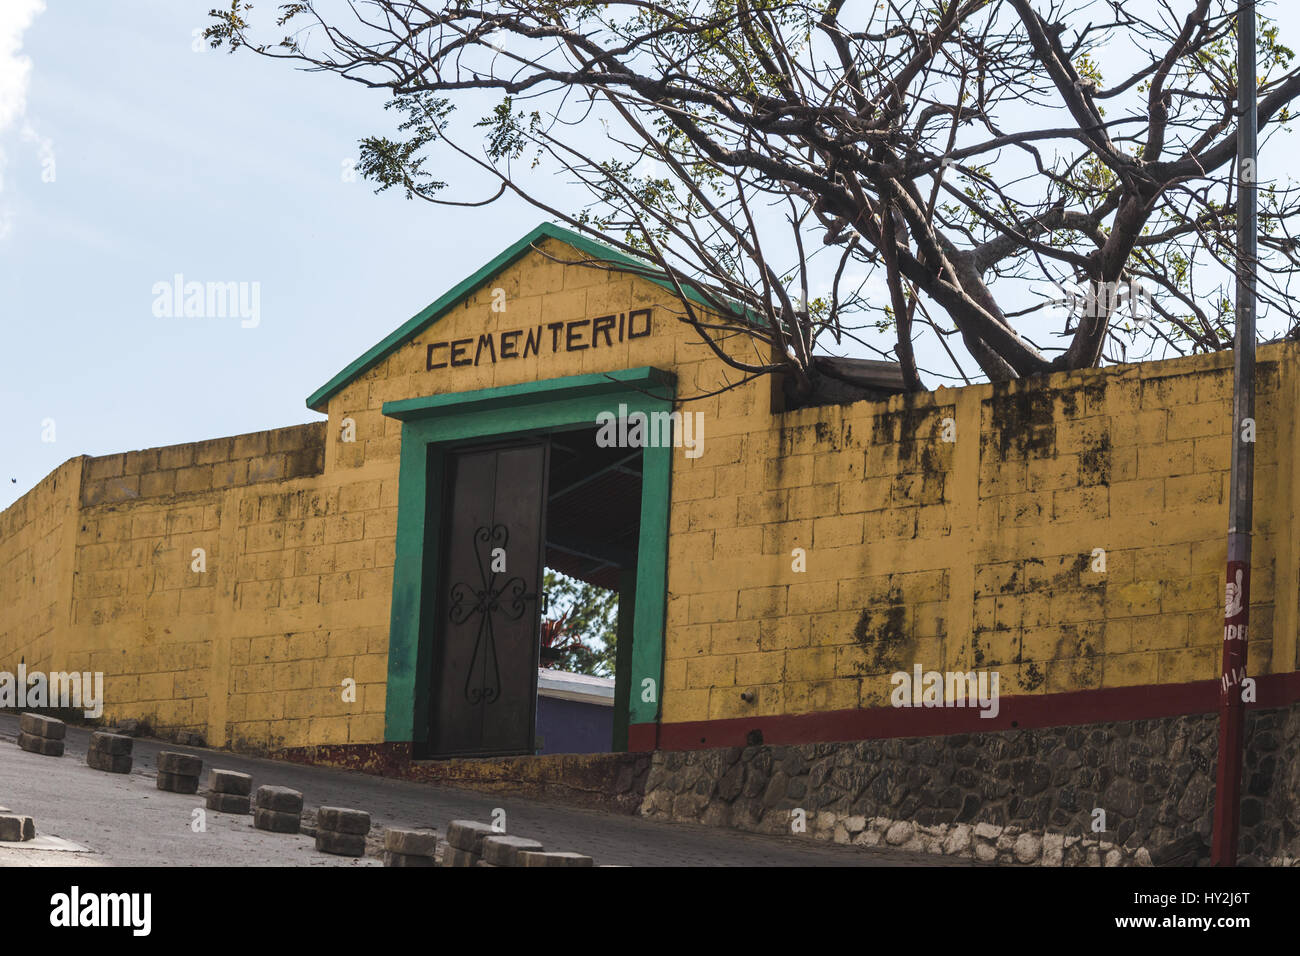 Cemetery in Guatemala with the word 'Cementerio' over entrance door. Stock Photo